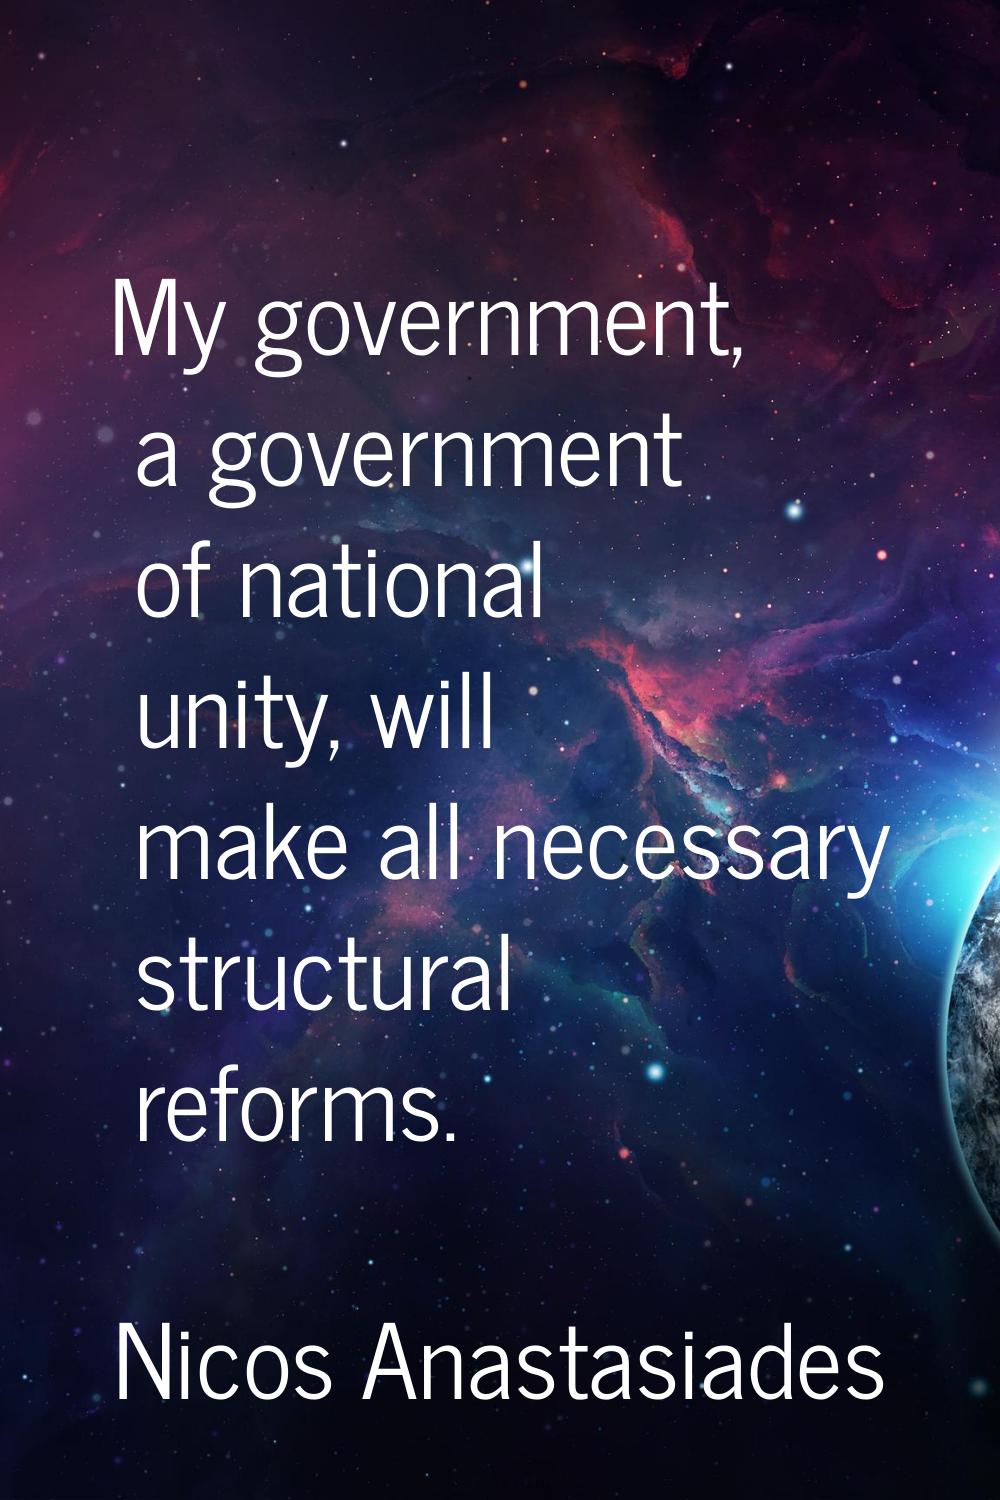 My government, a government of national unity, will make all necessary structural reforms.